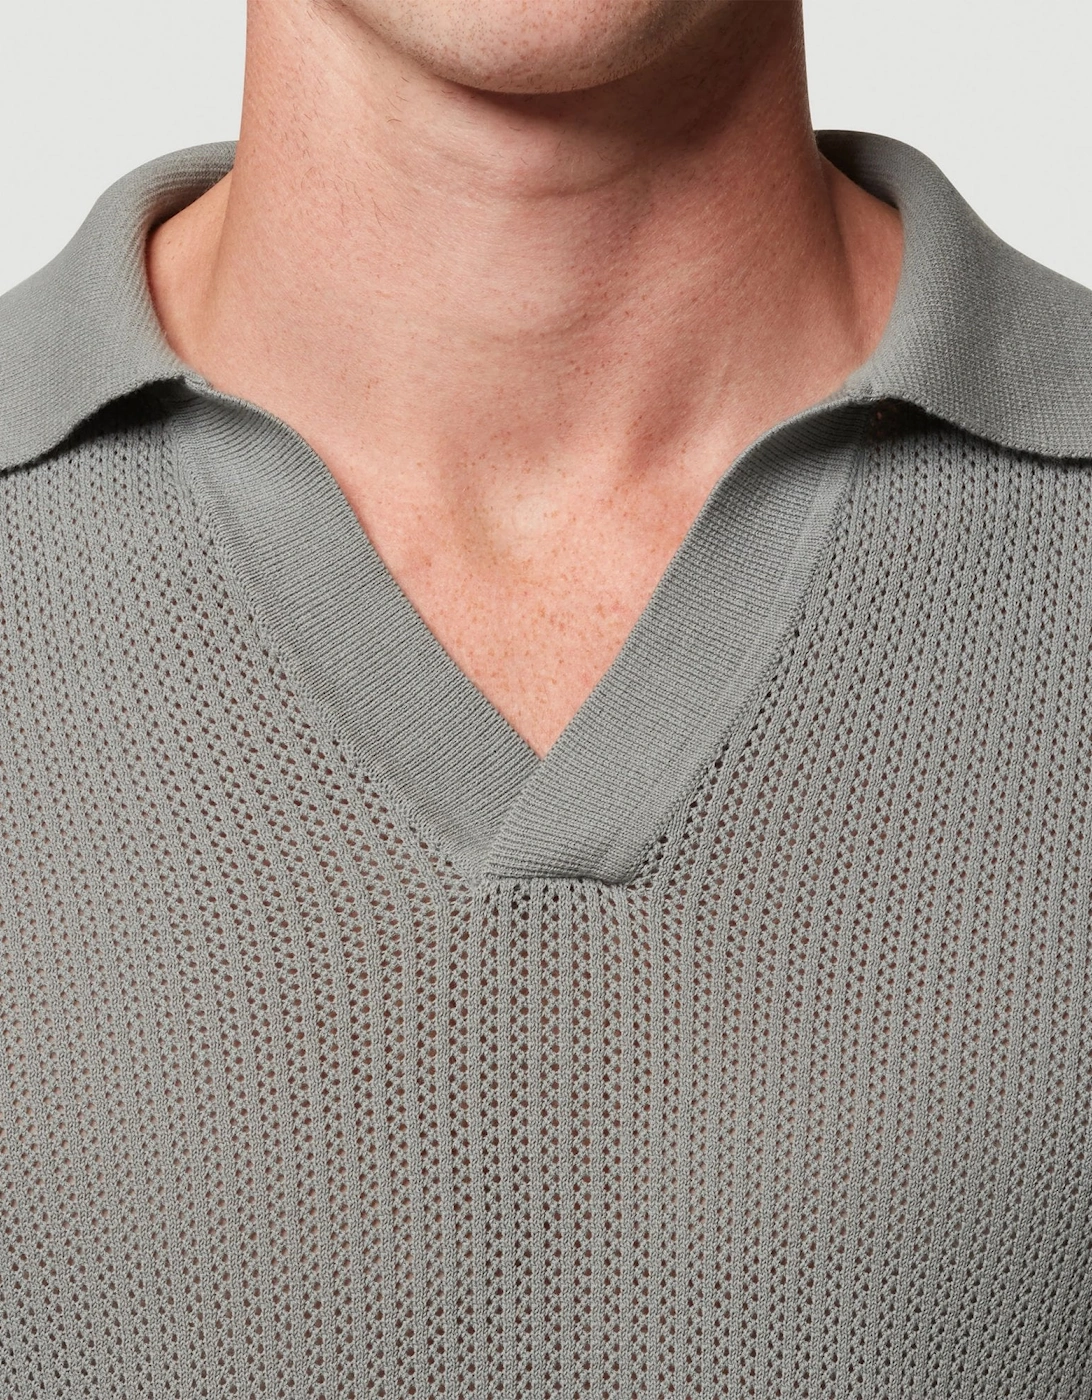 Libera Knitted Open Neck Knitted Polo